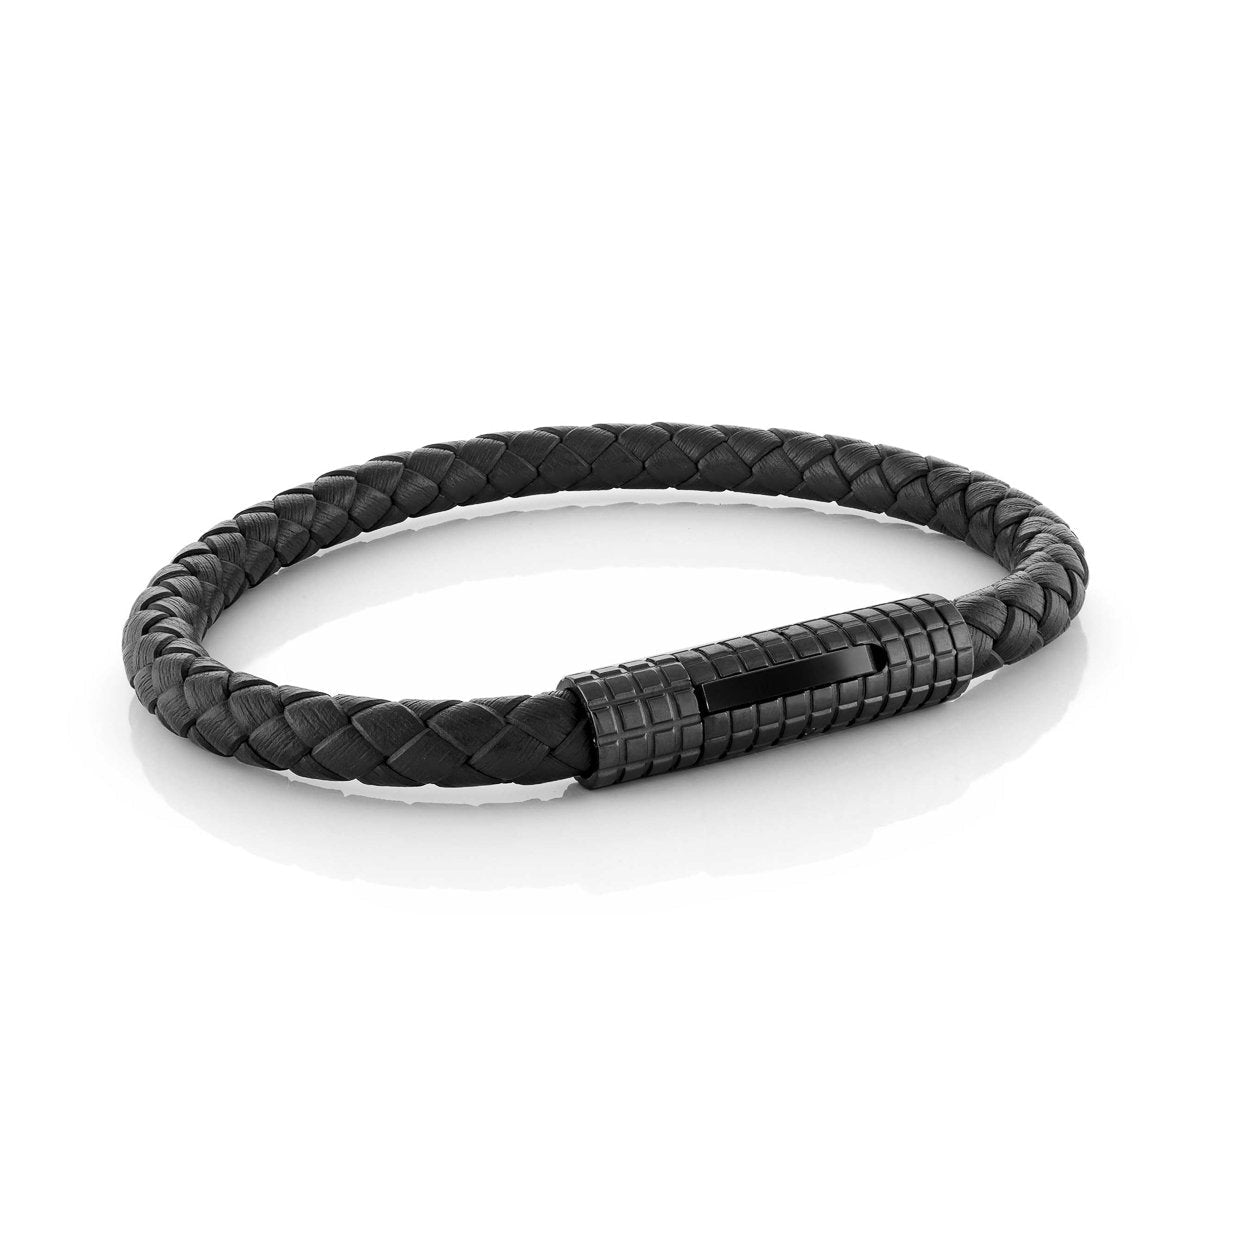 Stainless Steel Design Clasp Braided Genuine Leather Bracelet